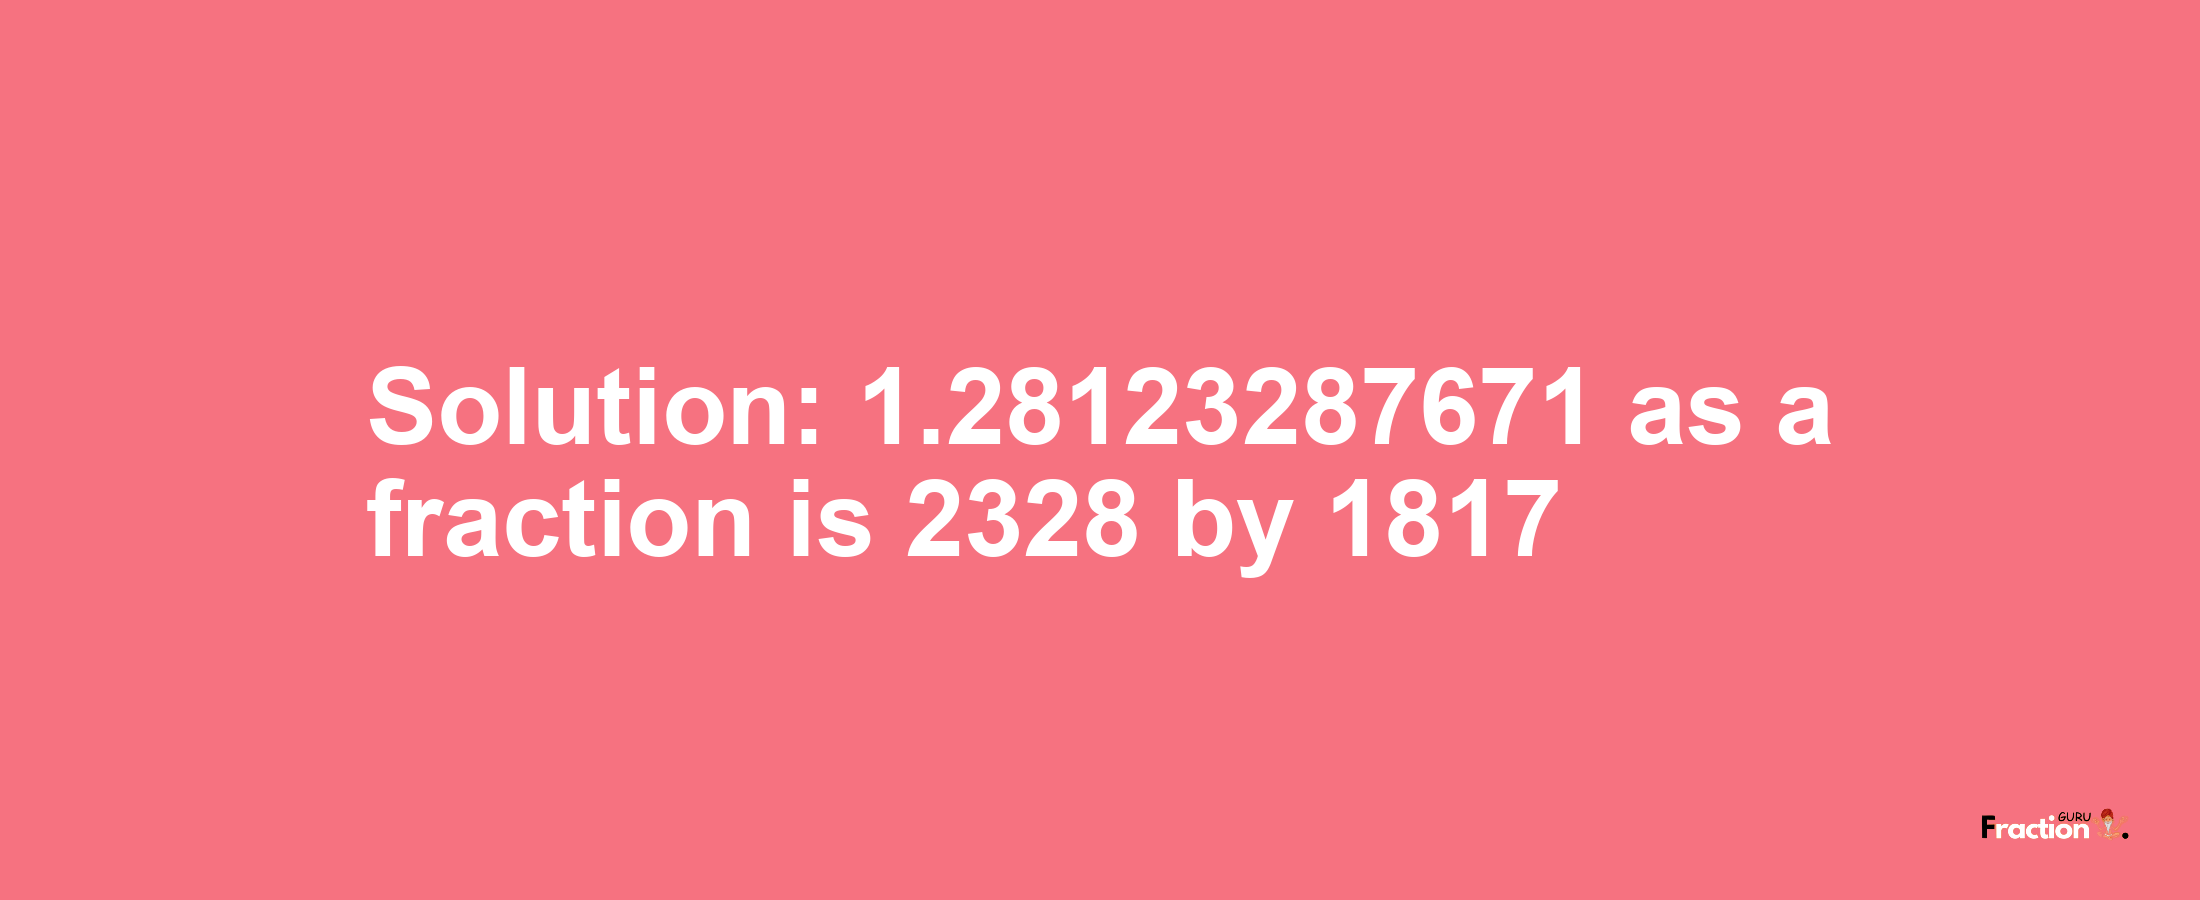 Solution:1.28123287671 as a fraction is 2328/1817